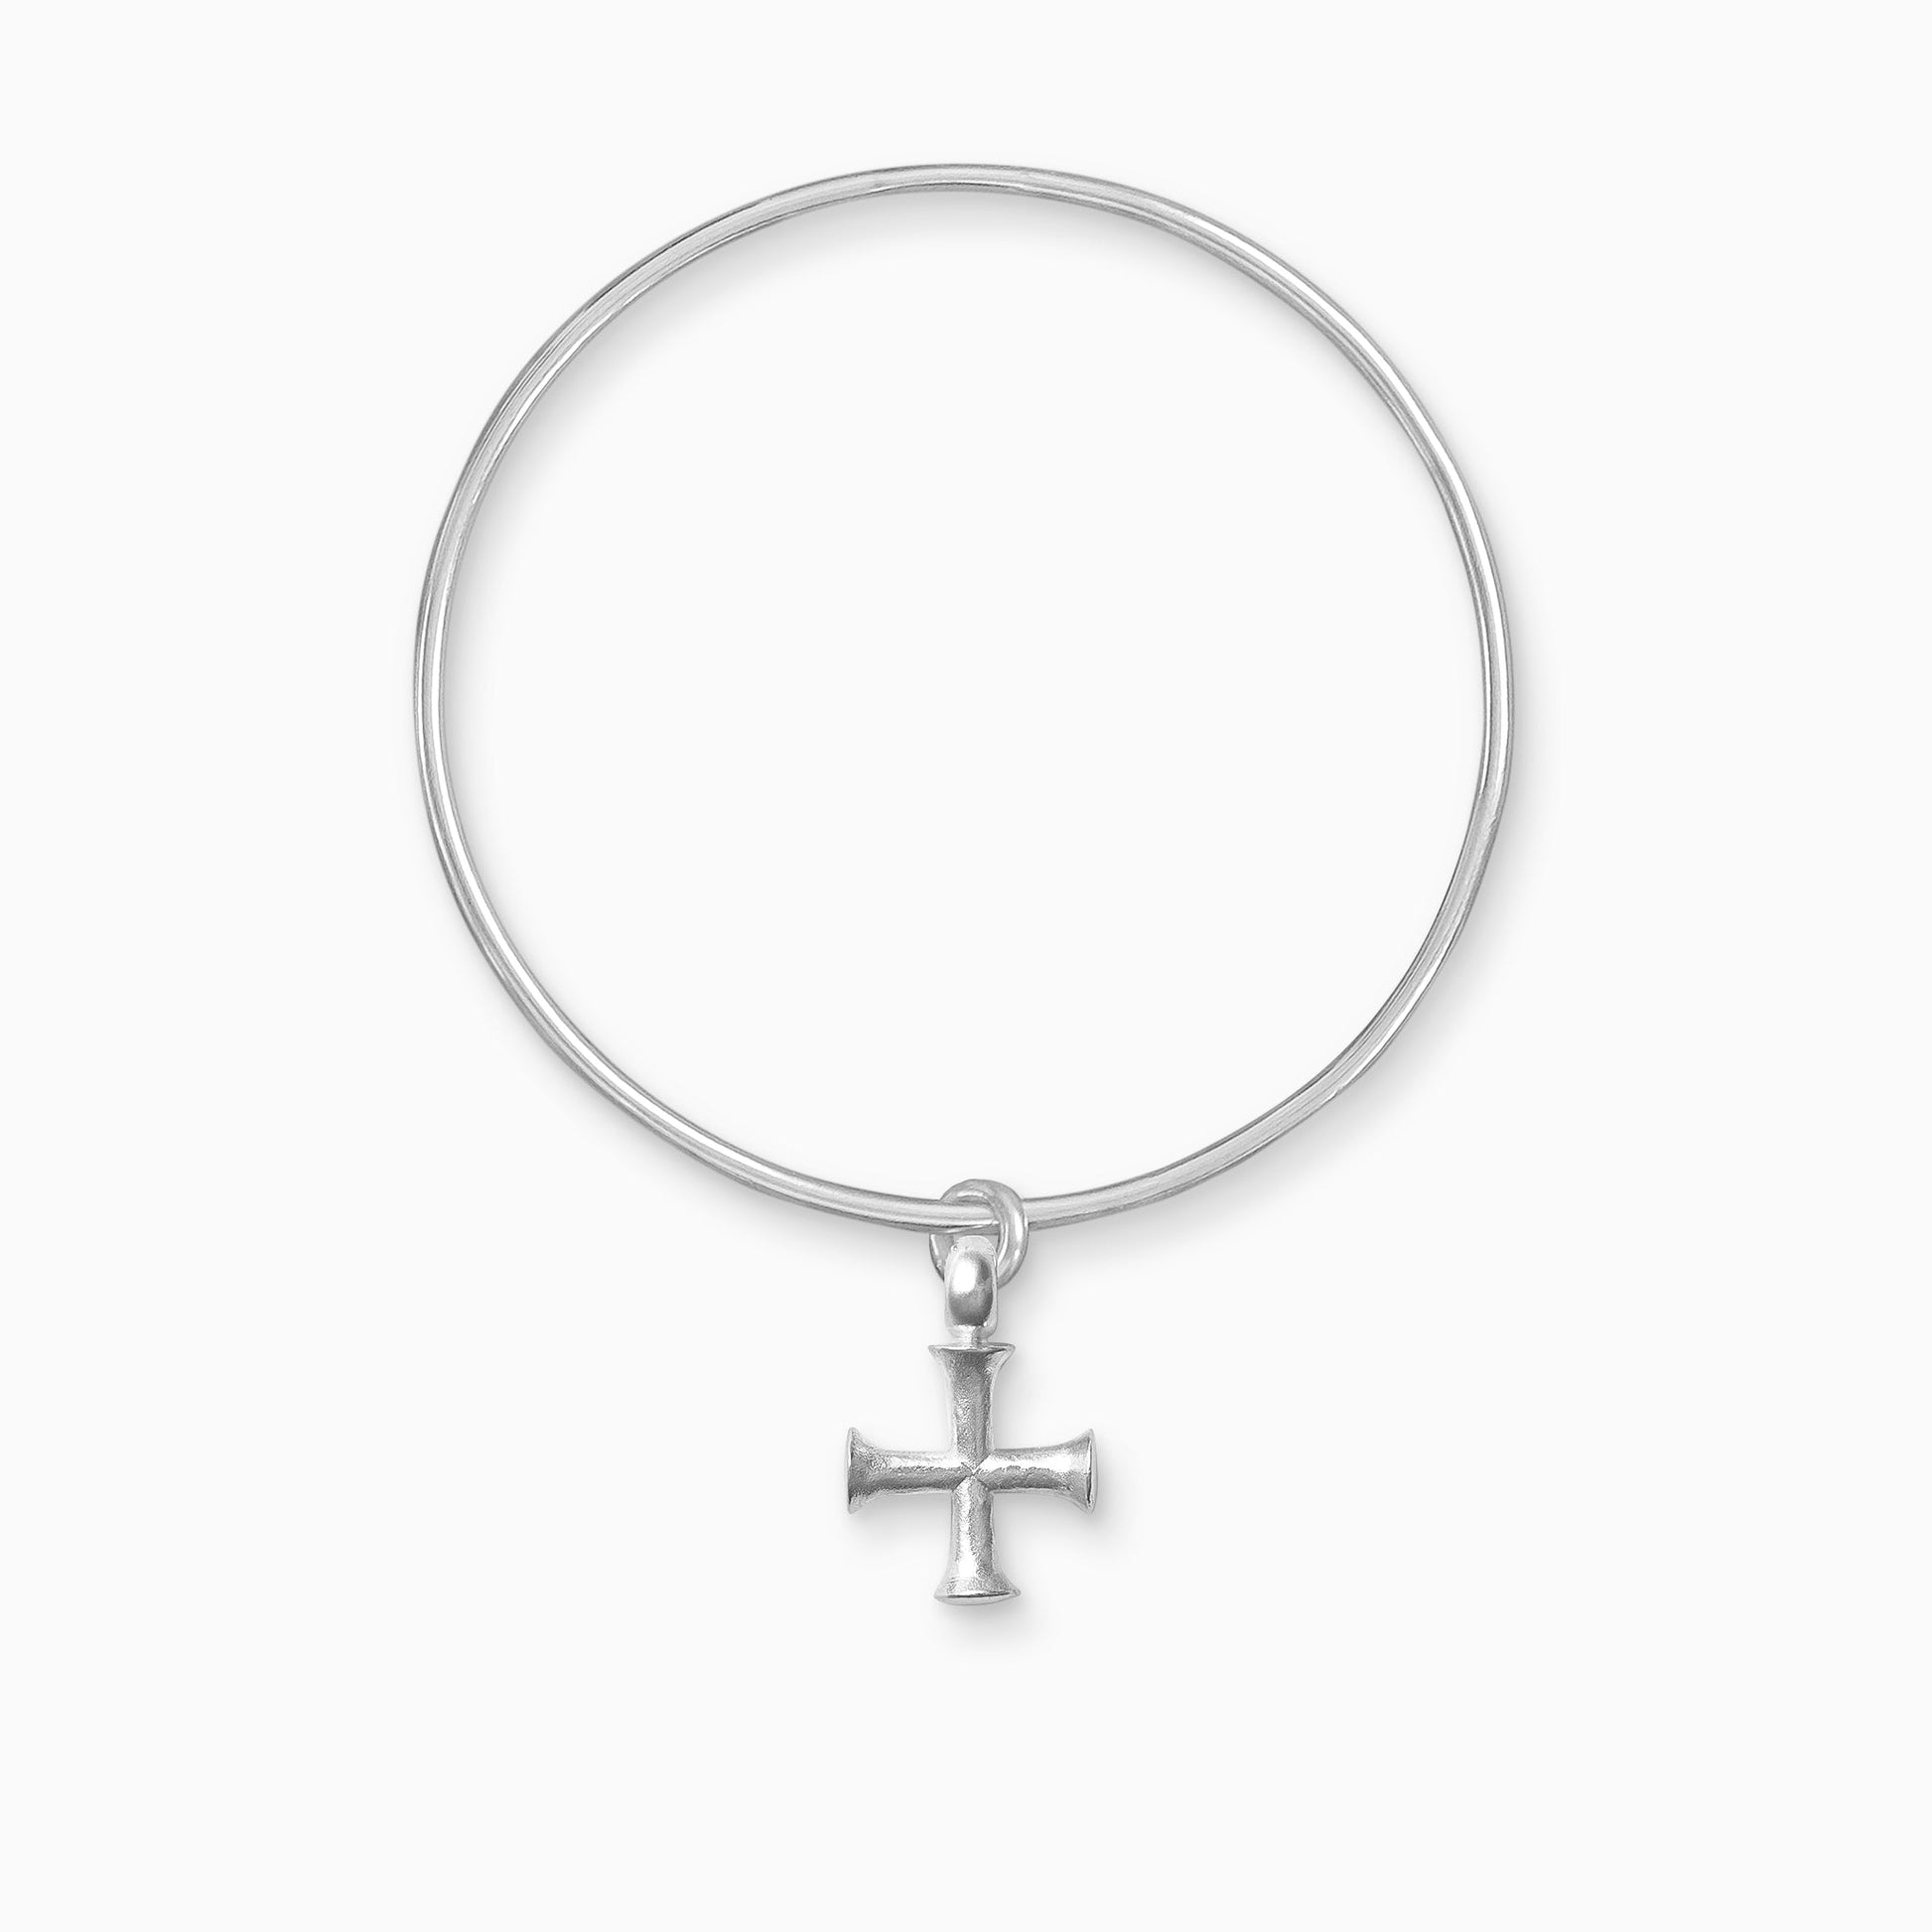 A recycled Silver geometric cross charm freely moving on a round wire bangle. The cross has equal length arms with outward spreading ends.  Charm 25mm. Bangle 63mm inside diameter x 2mm round wire.